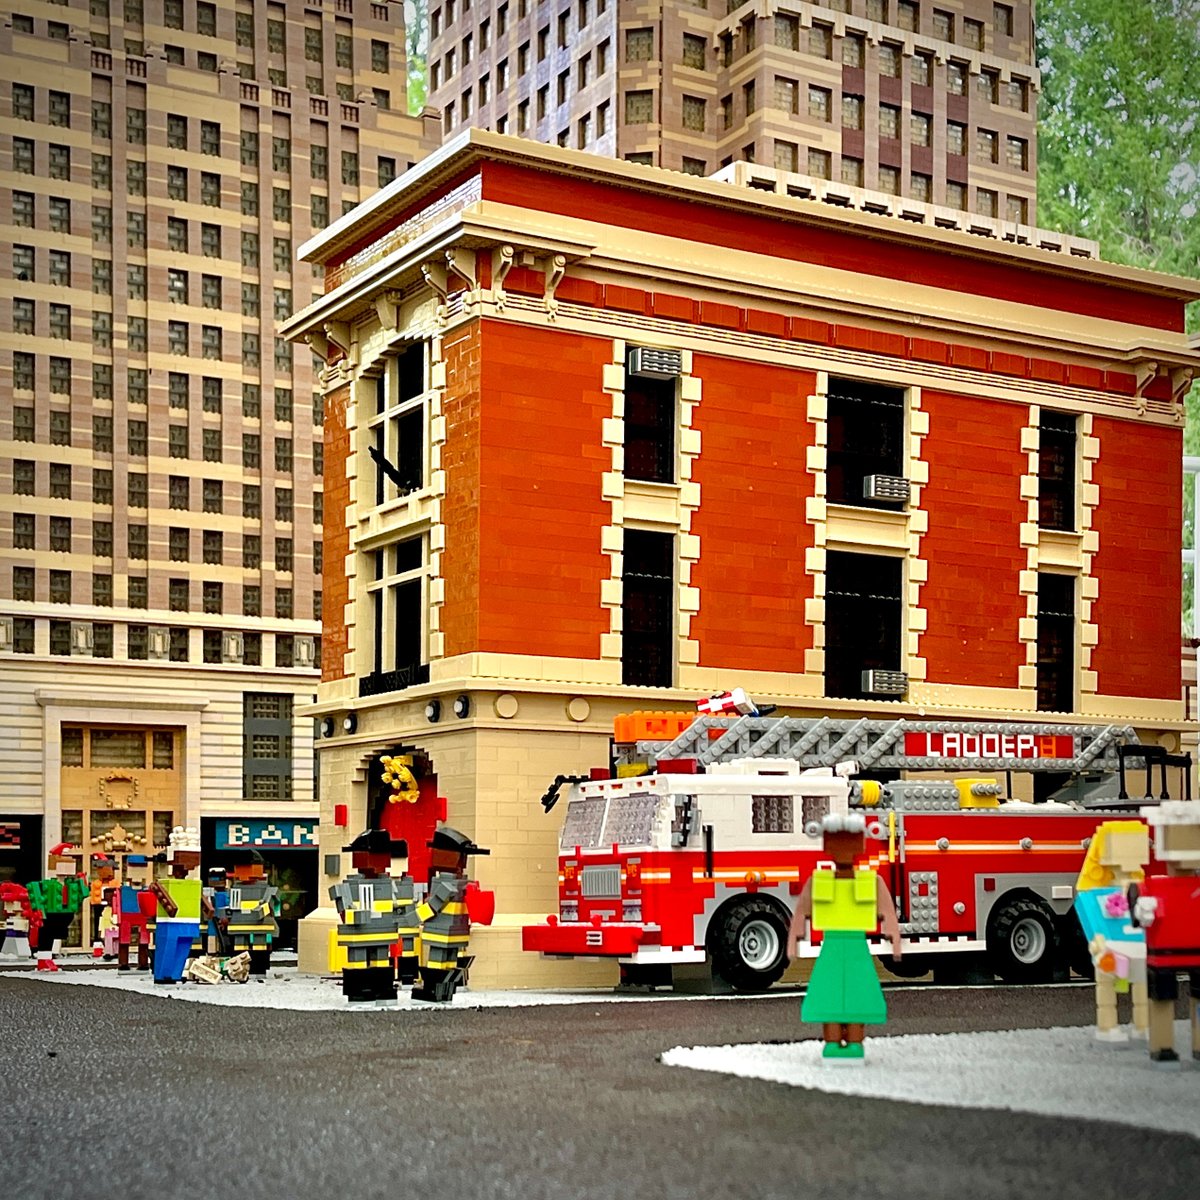 Who you gonna call? The Miniland NYC Firefighters. 🚒 Definitely nothing to do with ghosts. 😉 New in Miniland NYC! 🏙️ The Hook & Ladder 8 Historical Firehouse.